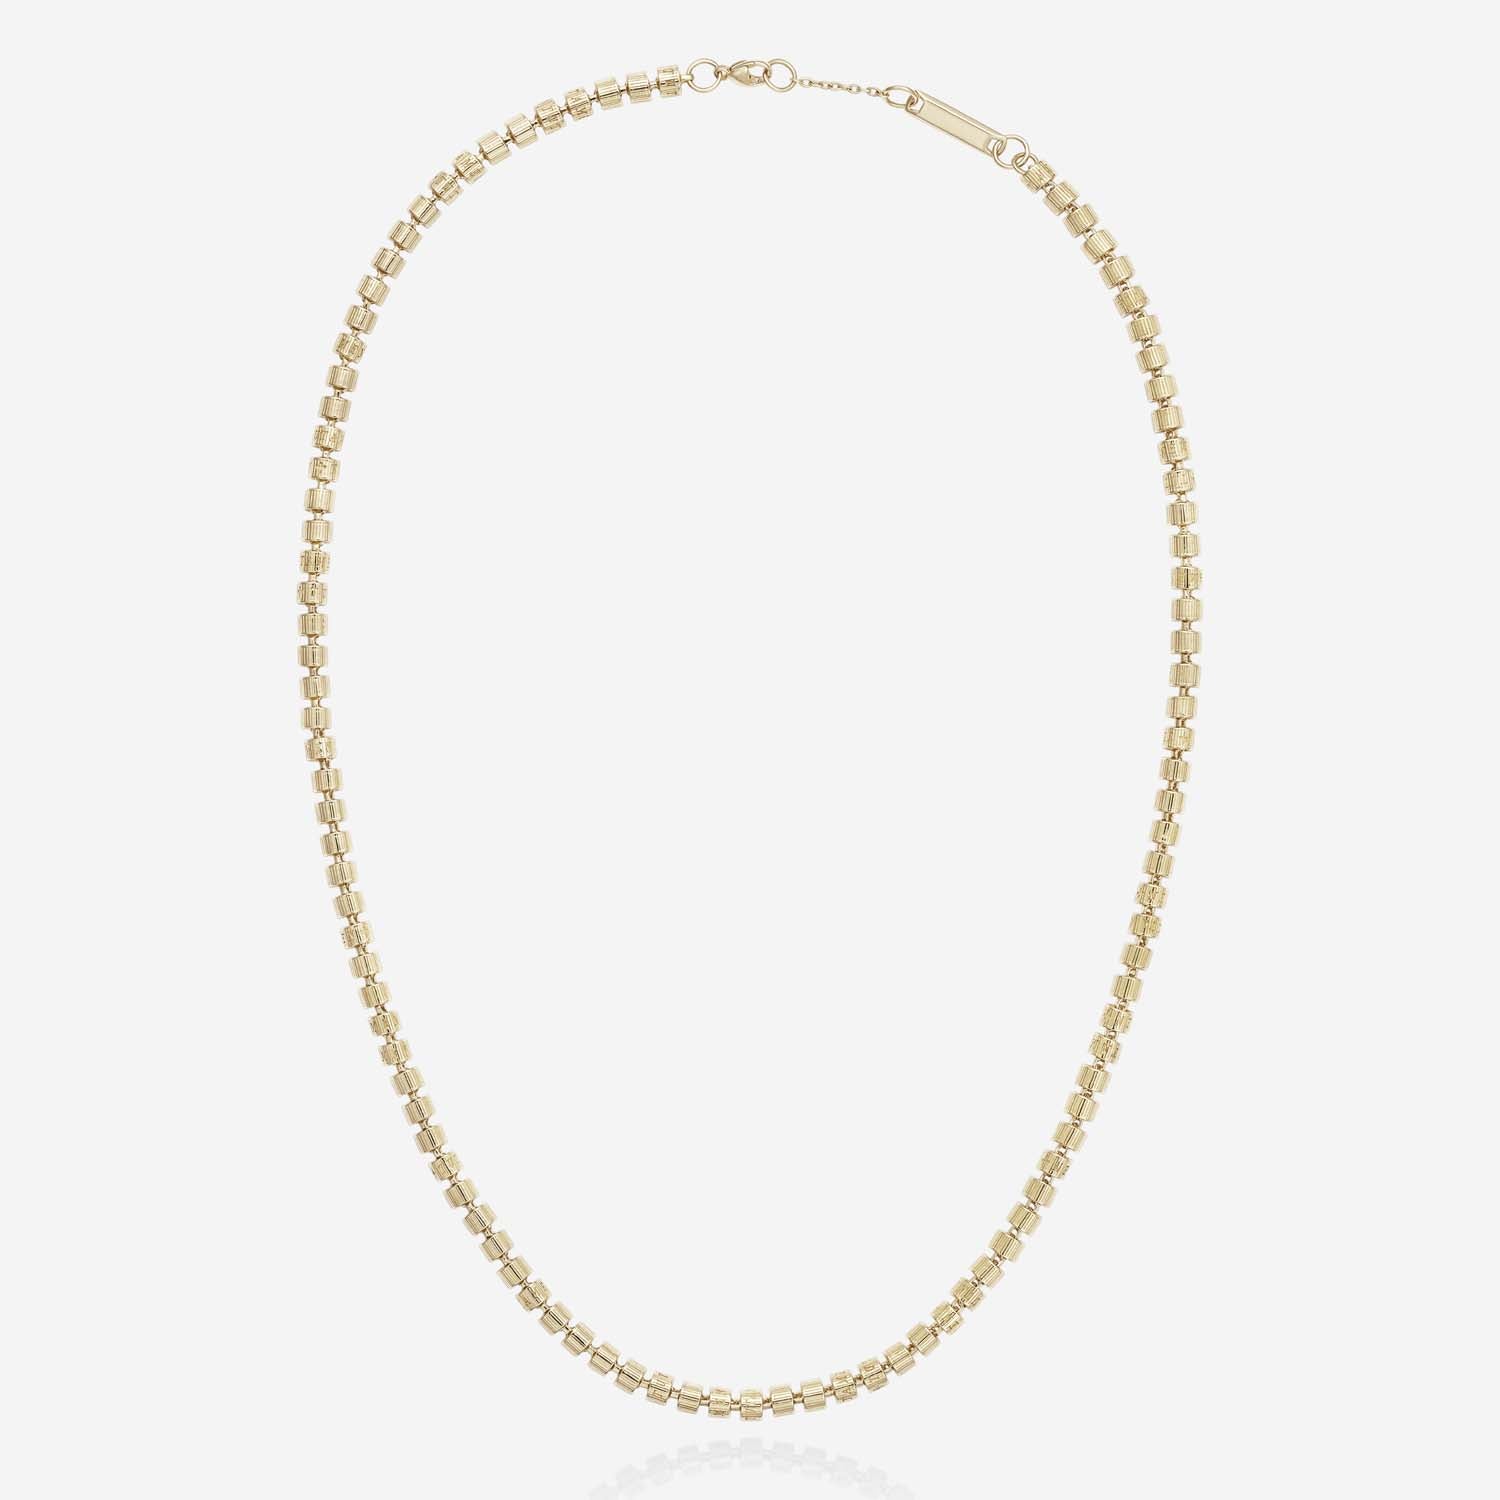 886 Royal Mint Necklaces Tutamen Stack Necklace 9ct Yellow Gold